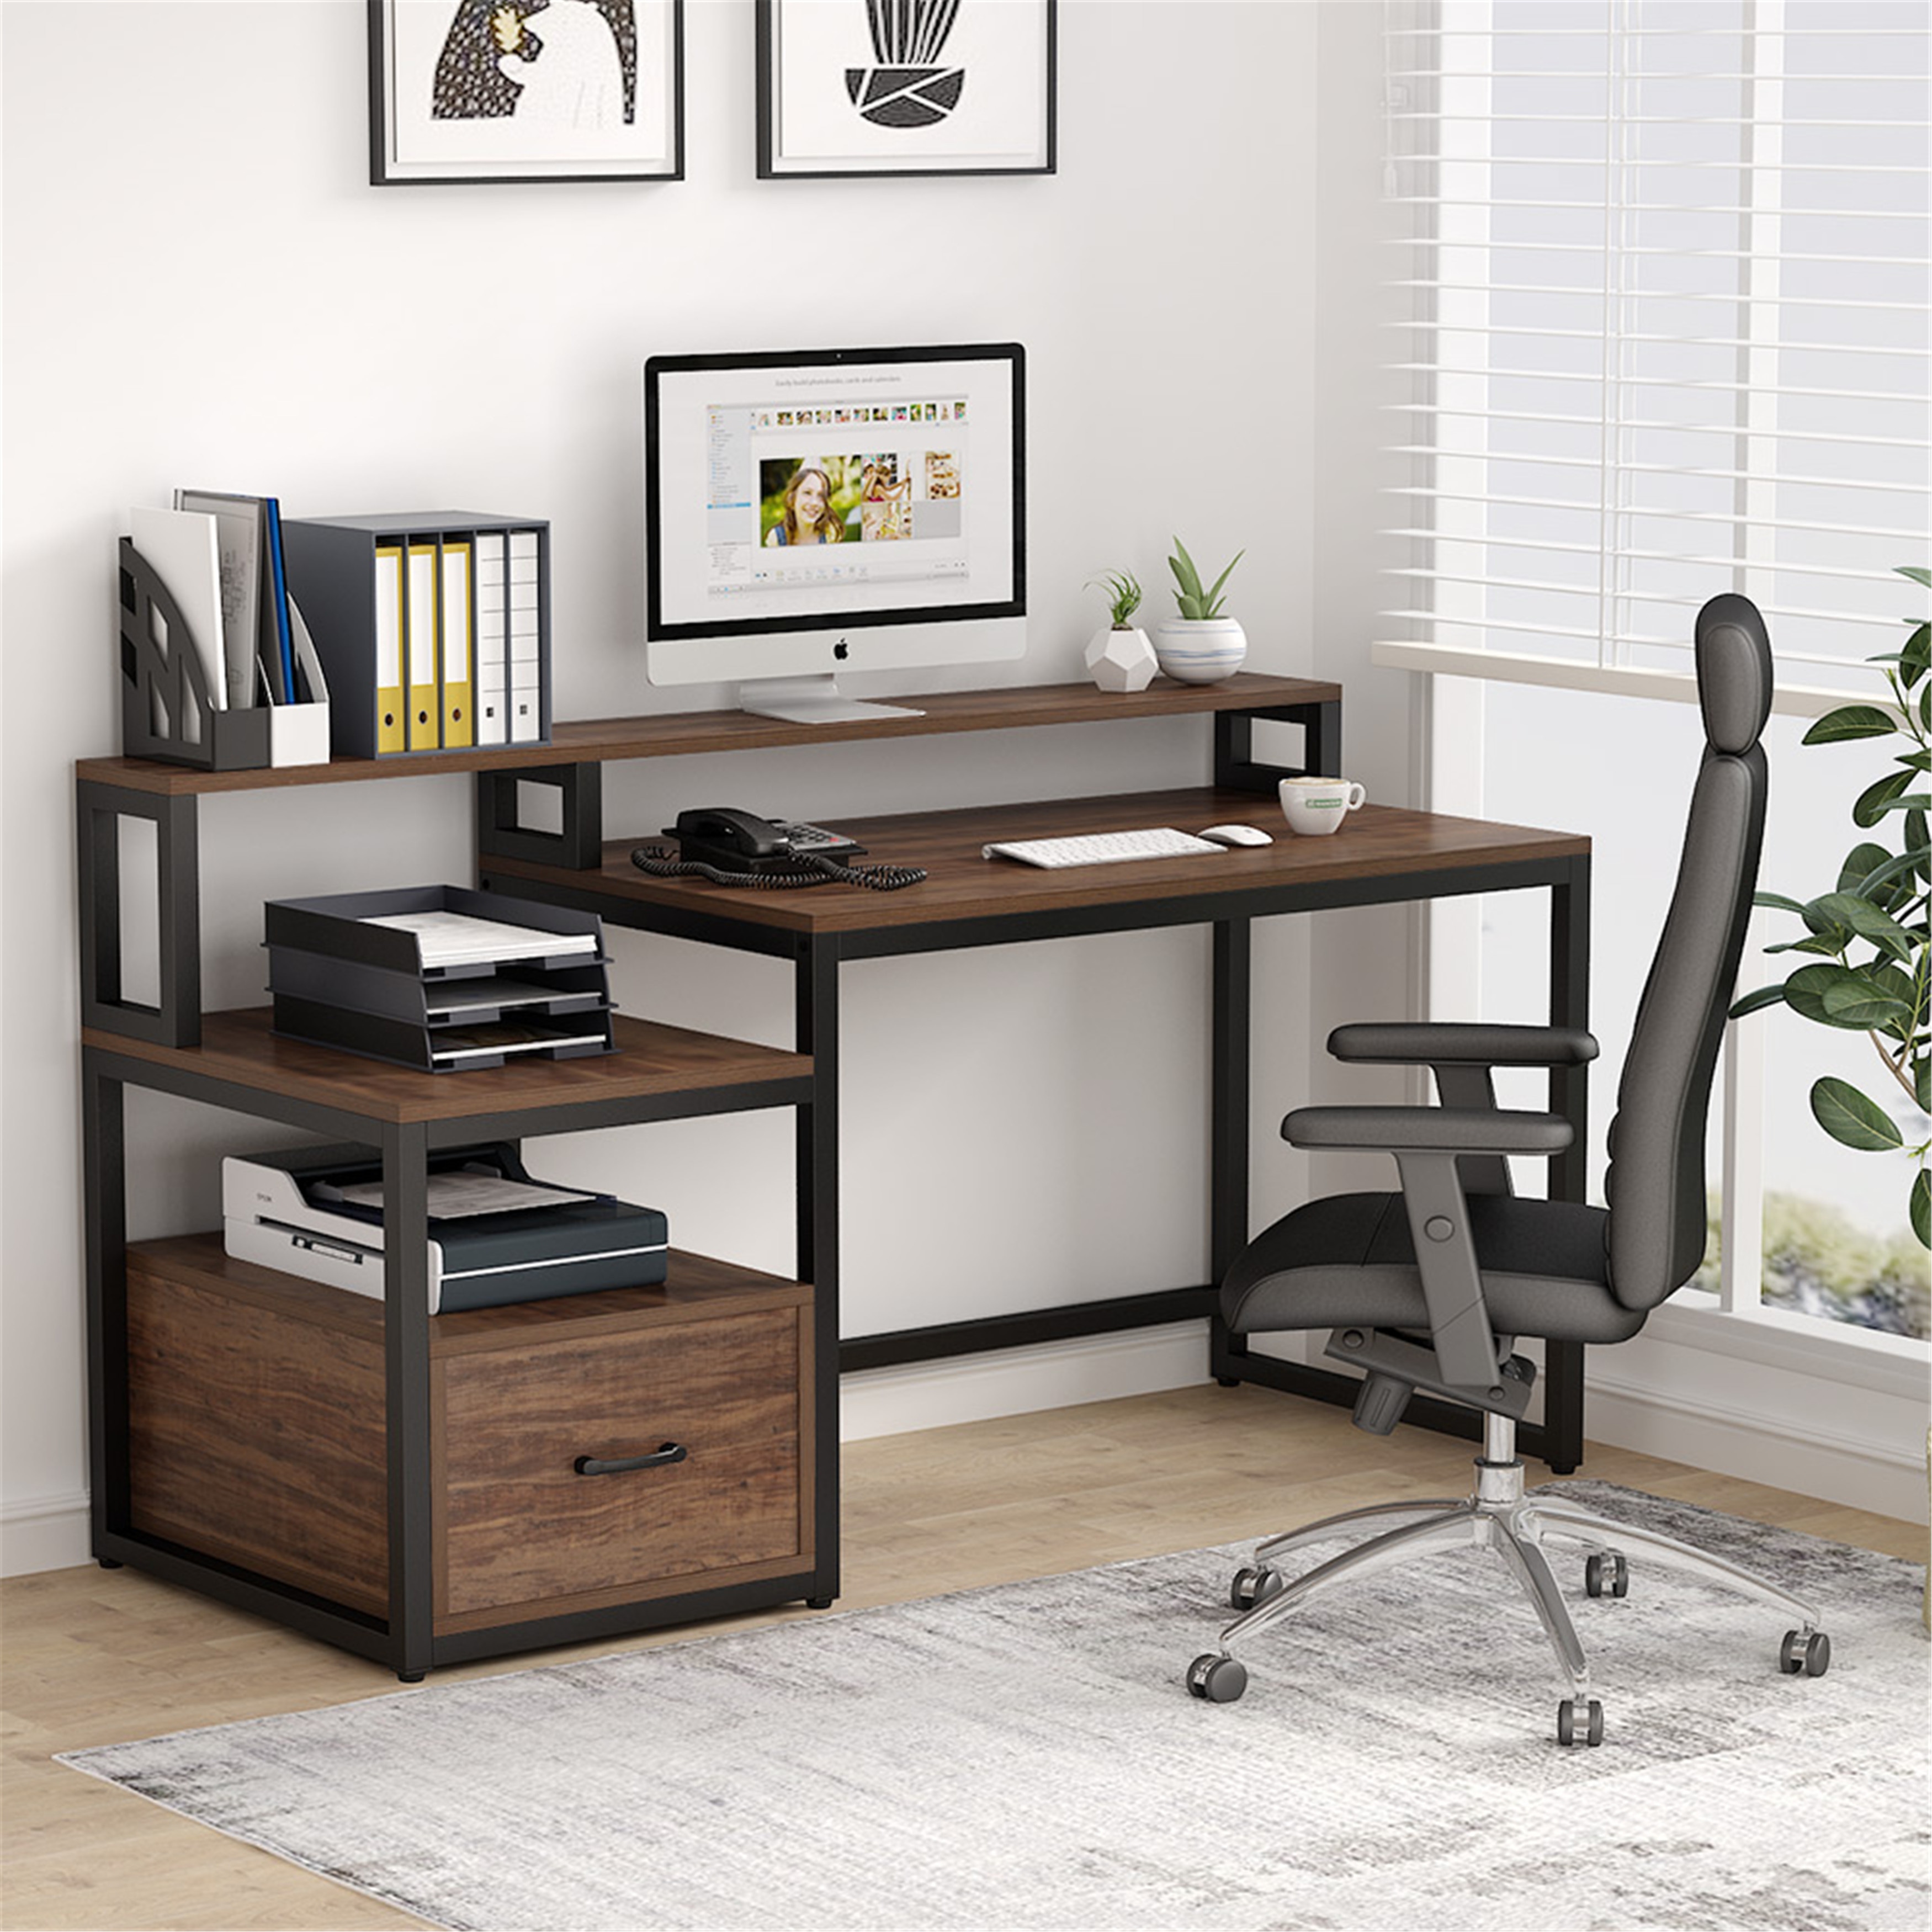 Modern Office Desk Monitor Executive Computer Storage Drawers Standing  Console Desk Table Writing Escrivaninha Office Furniture